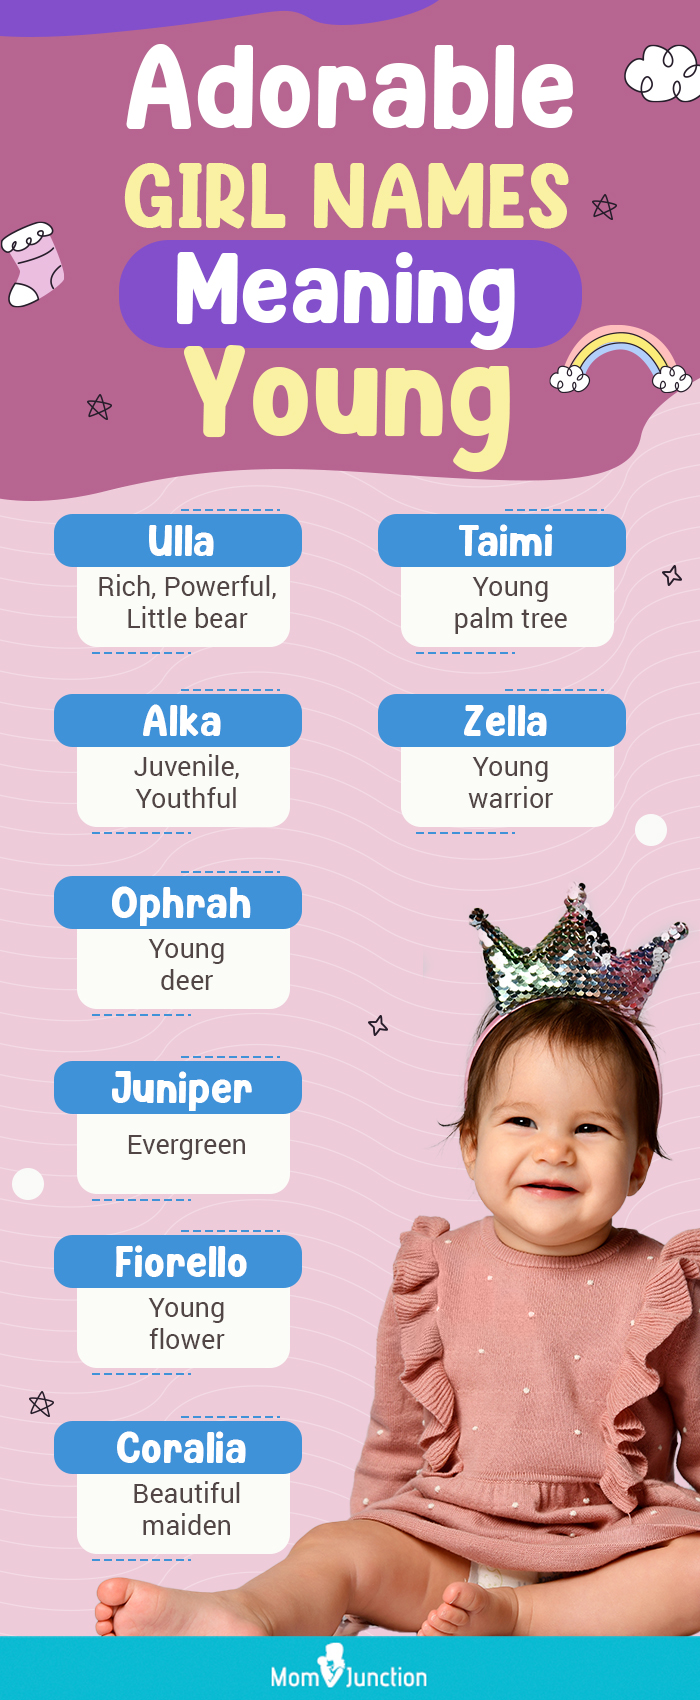 enduring girl names meaning young (infographic)